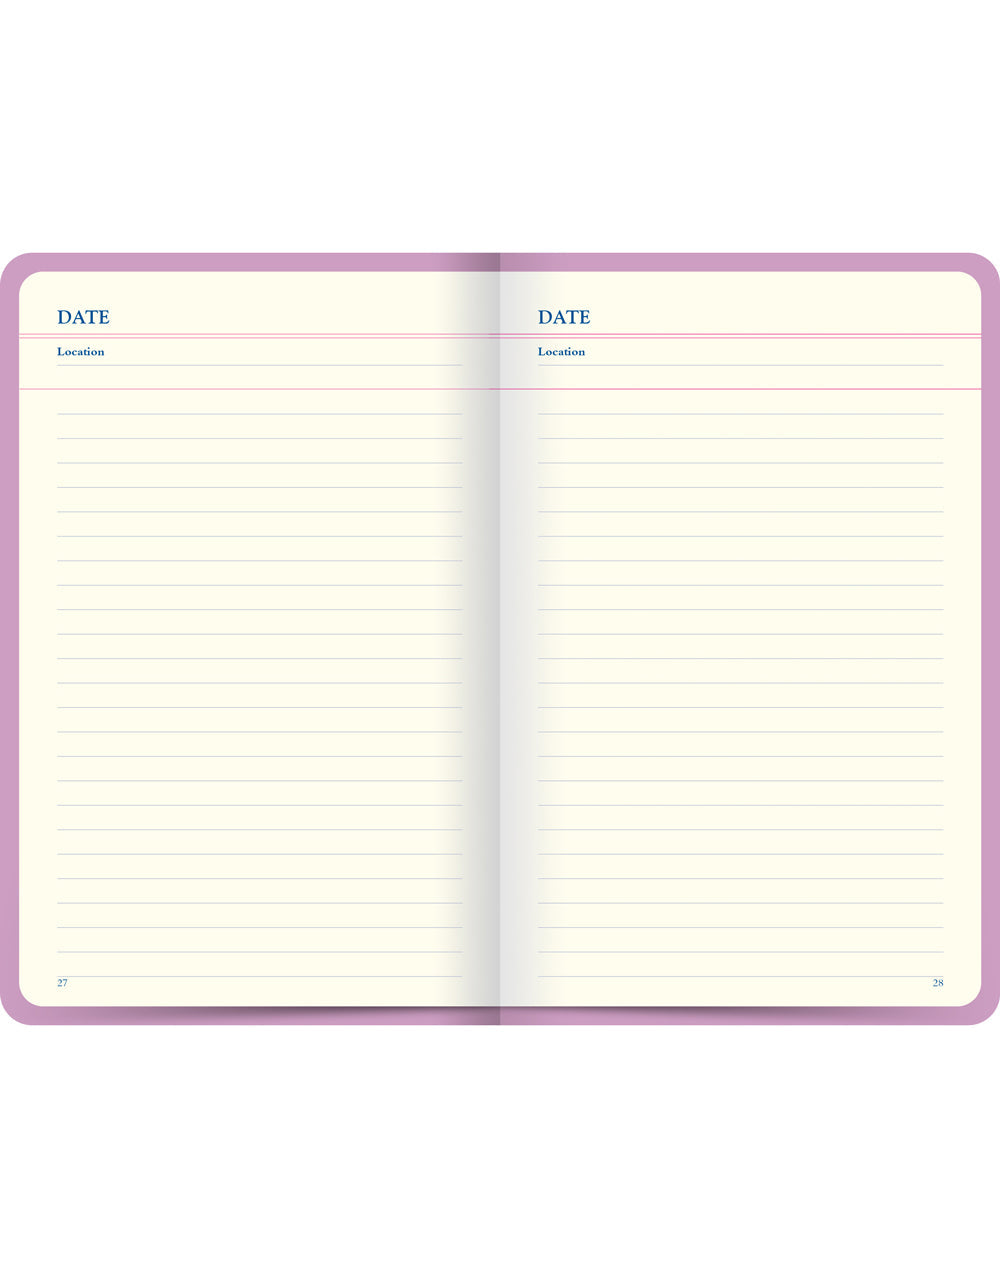 Icon Book Travel Journal Pink Dates-Locations#colour_pink